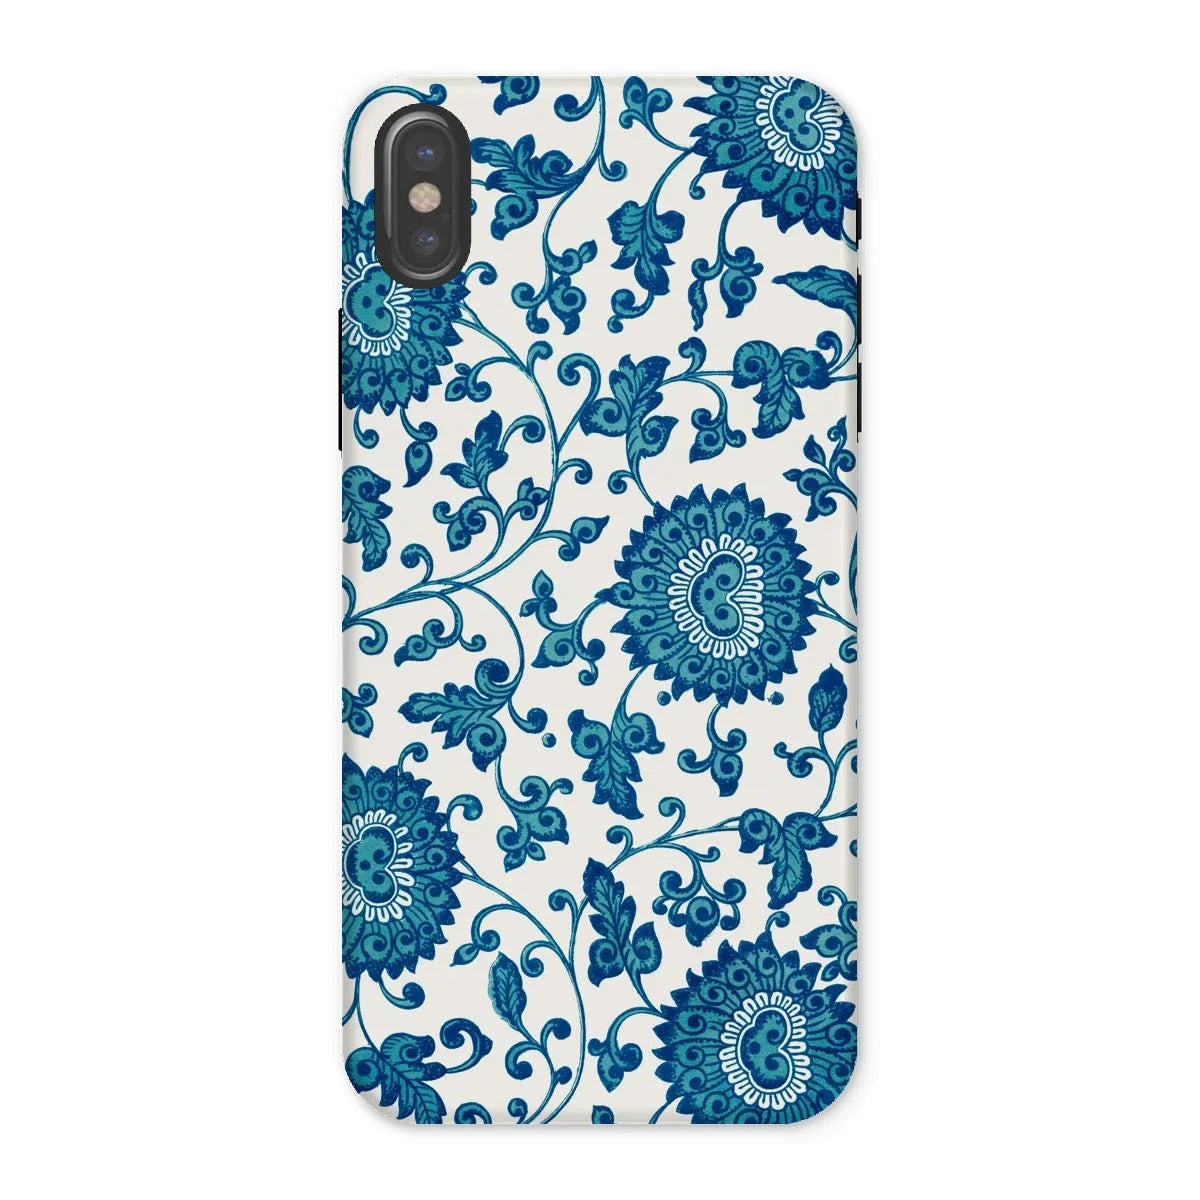 Blue And White Floral Aesthetic Art Phone Case - Owen Jones - Iphone x / Matte - Mobile Phone Cases - Aesthetic Art